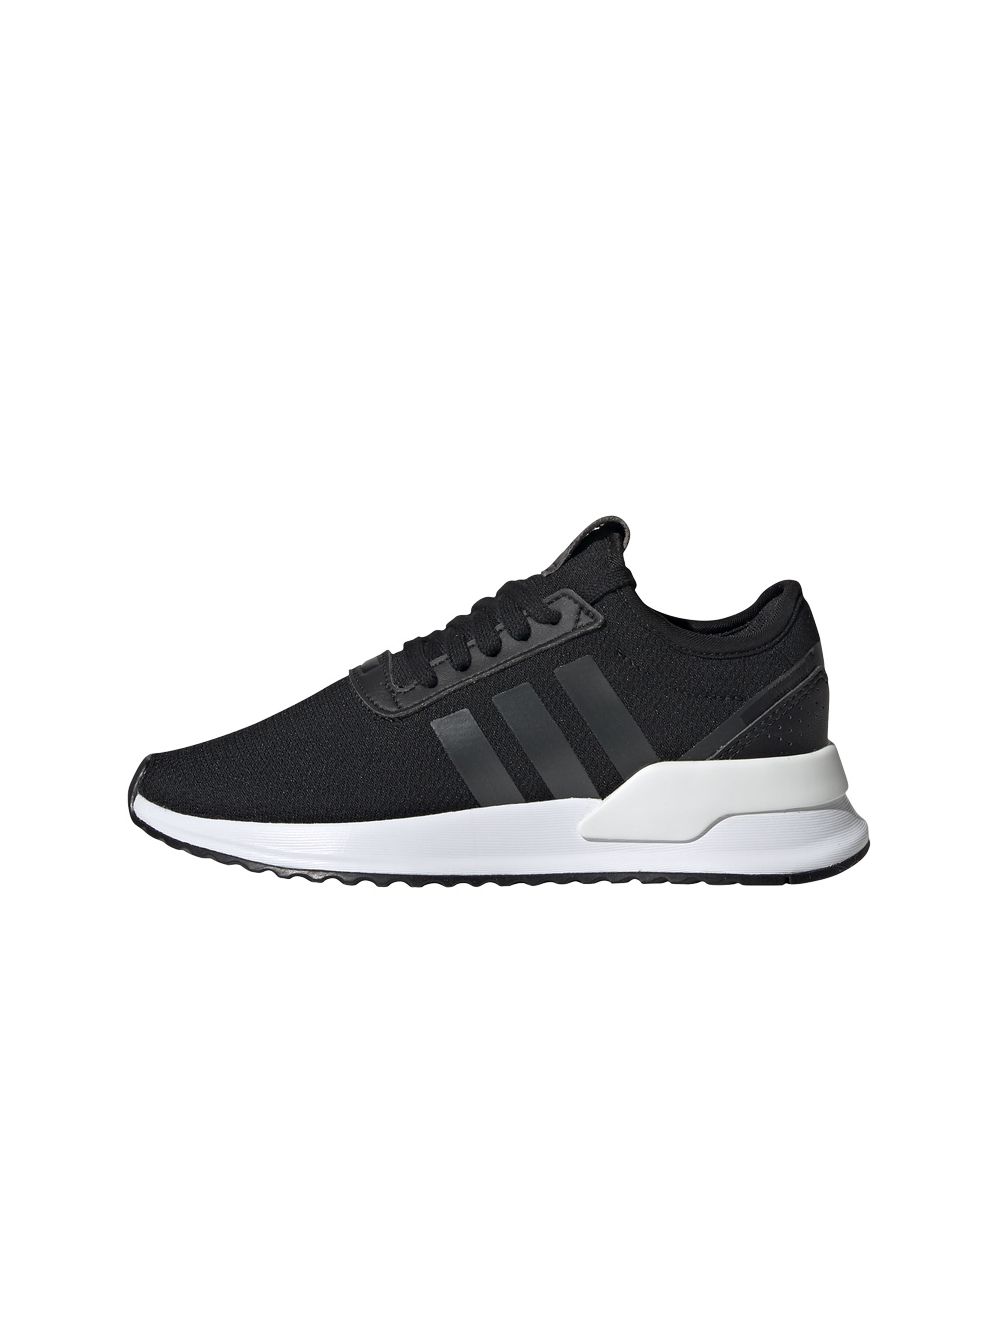 adidas youth shoes black